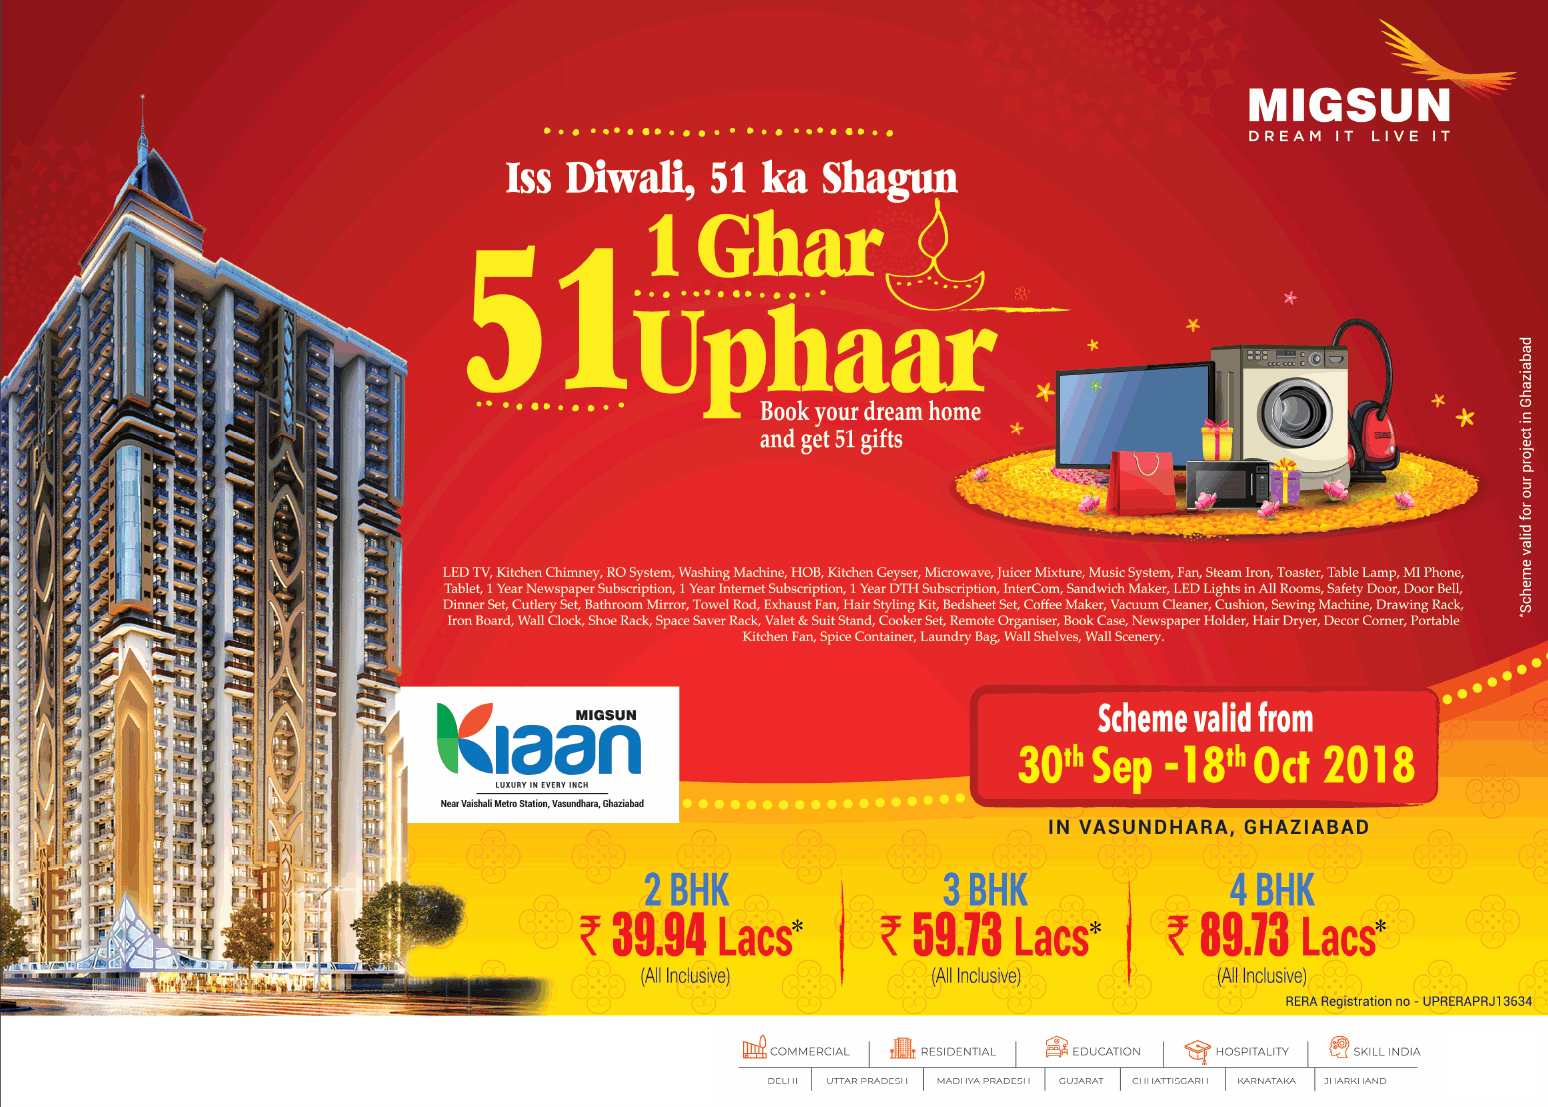 During this festive season get 51 gifts by booking home at Migsun Kiaan in Ghaziabad Update